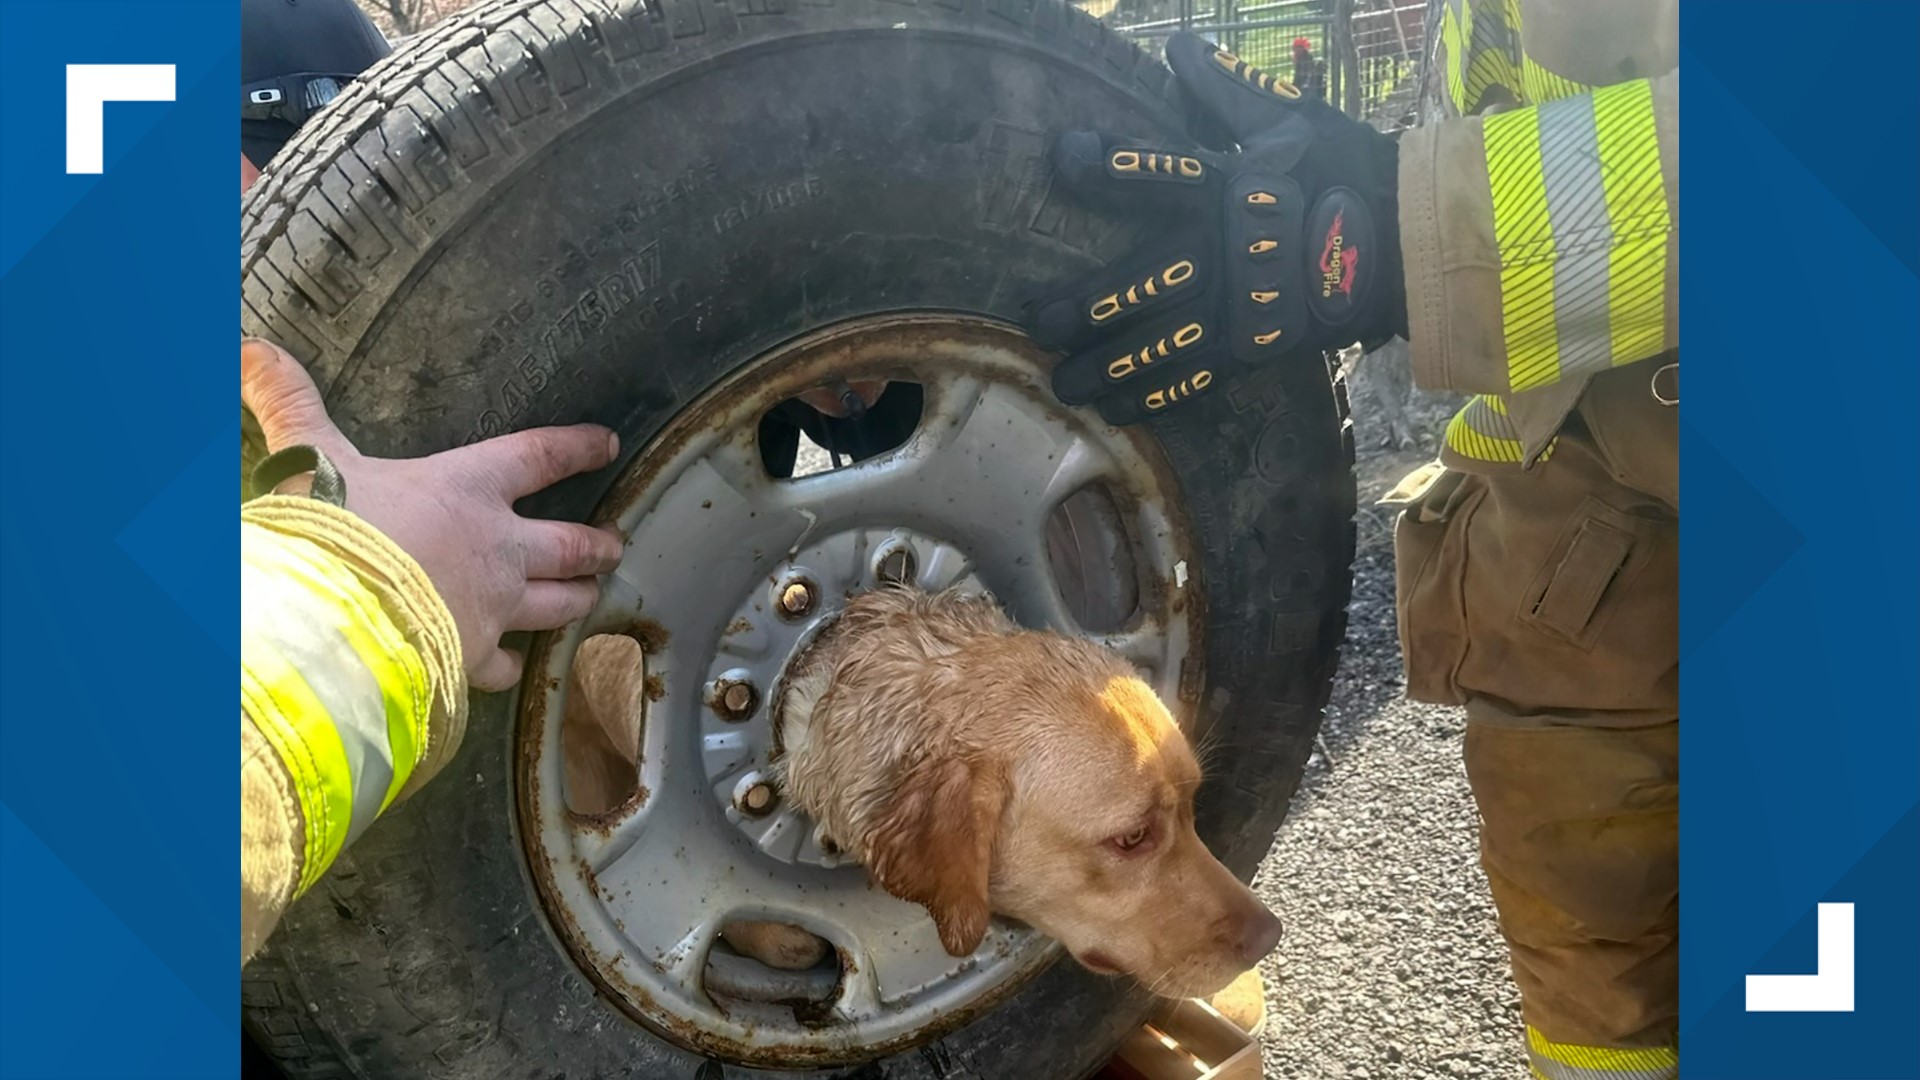 The Franklinville Volunteer Fire Company crew found Daisy when they responded to a Franklin Township home last Thursday.